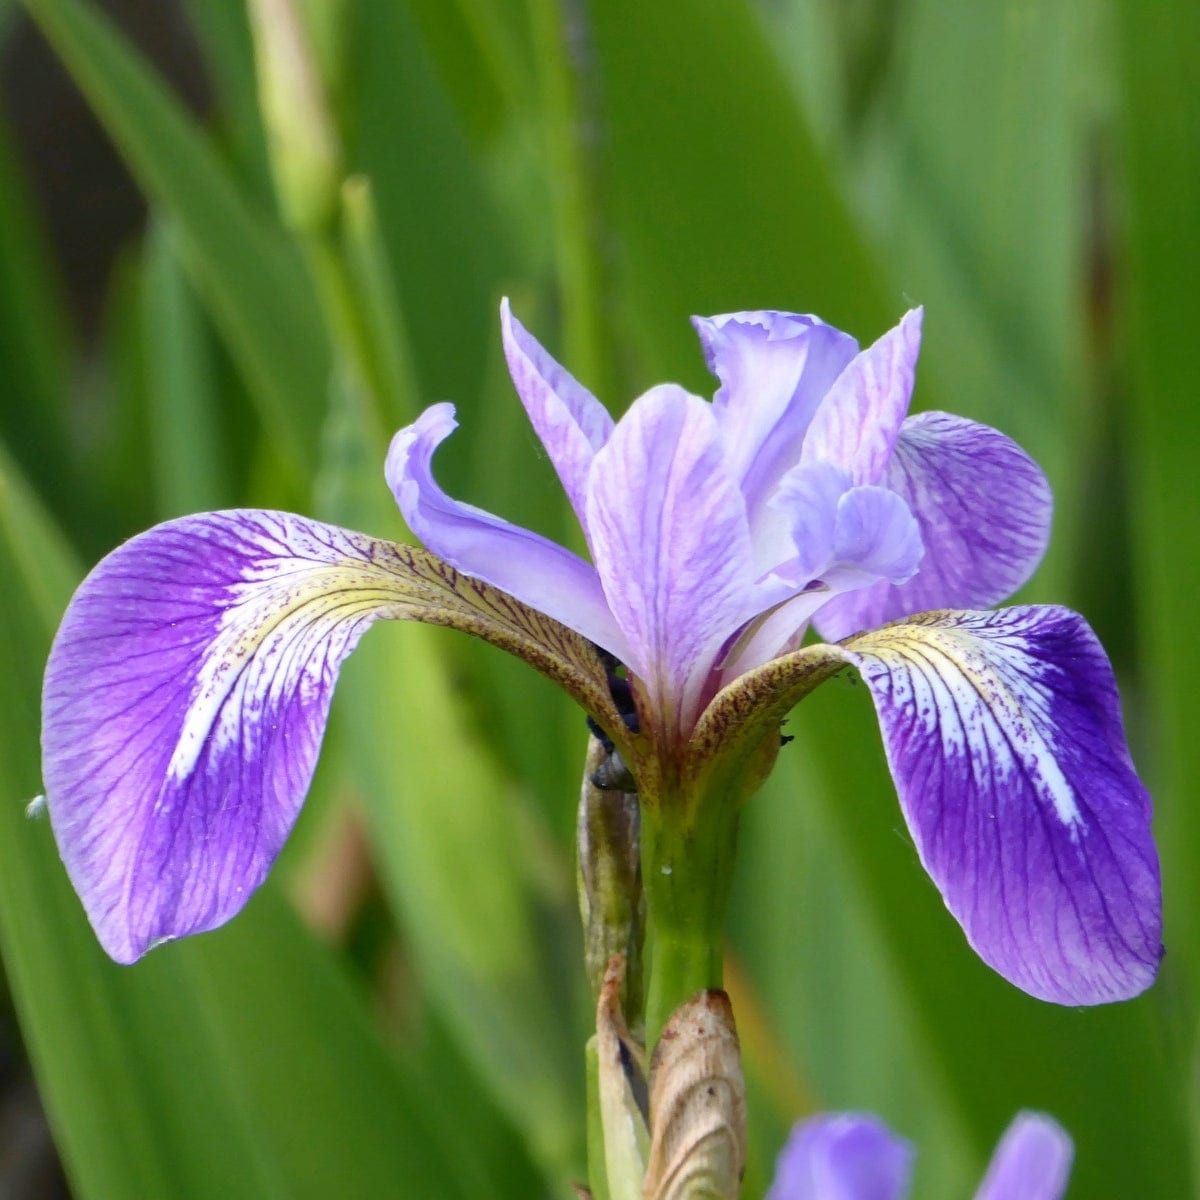 Iris Root Perfume Note Details - Why Orris Is So Expensive in Fragrance